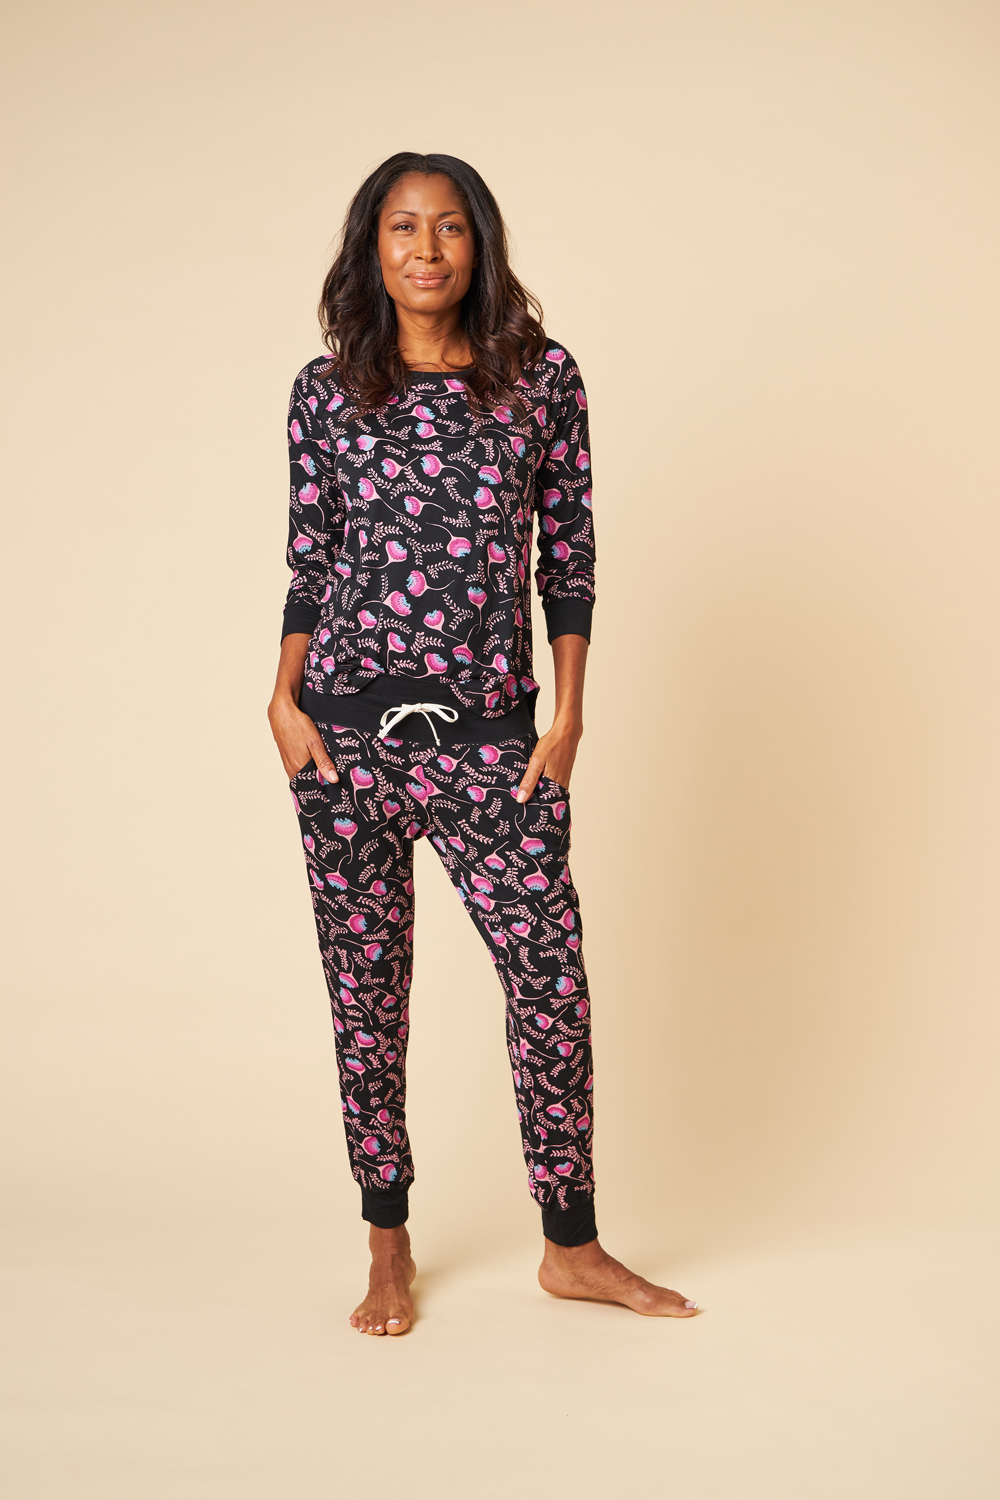 soft bamboo pajamas that are made in Canada